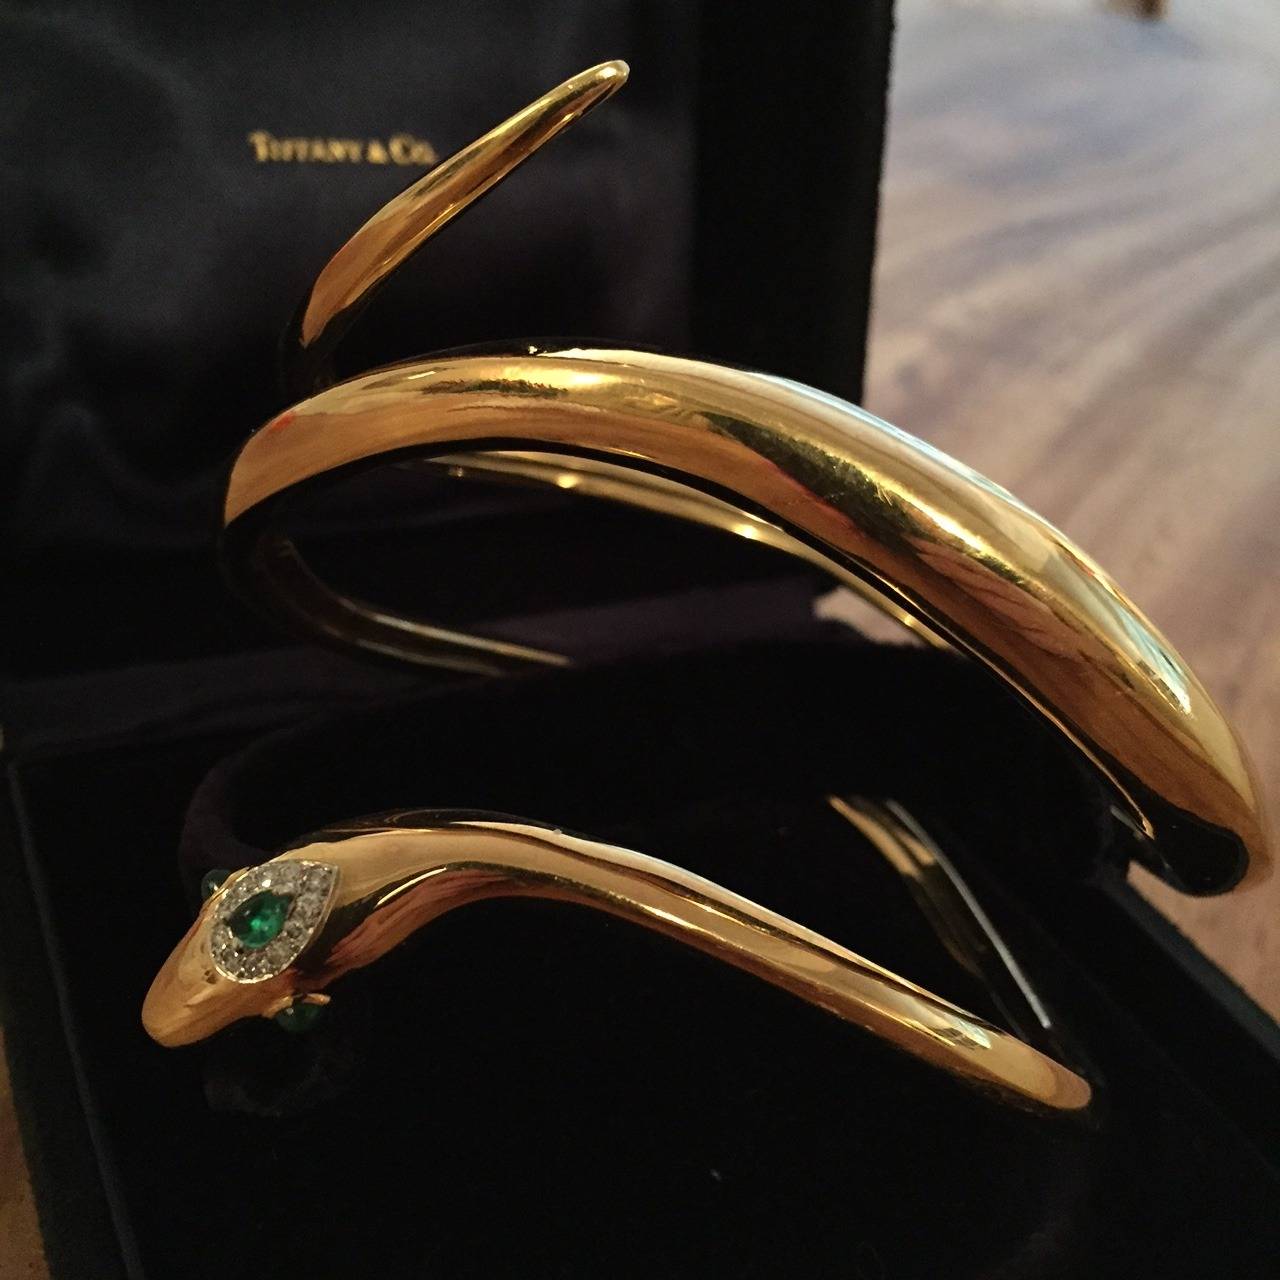 Tiffany & Co. Donald Claflin Upper Arm Serpent Bangle Bracelet In Excellent Condition For Sale In New York, NY